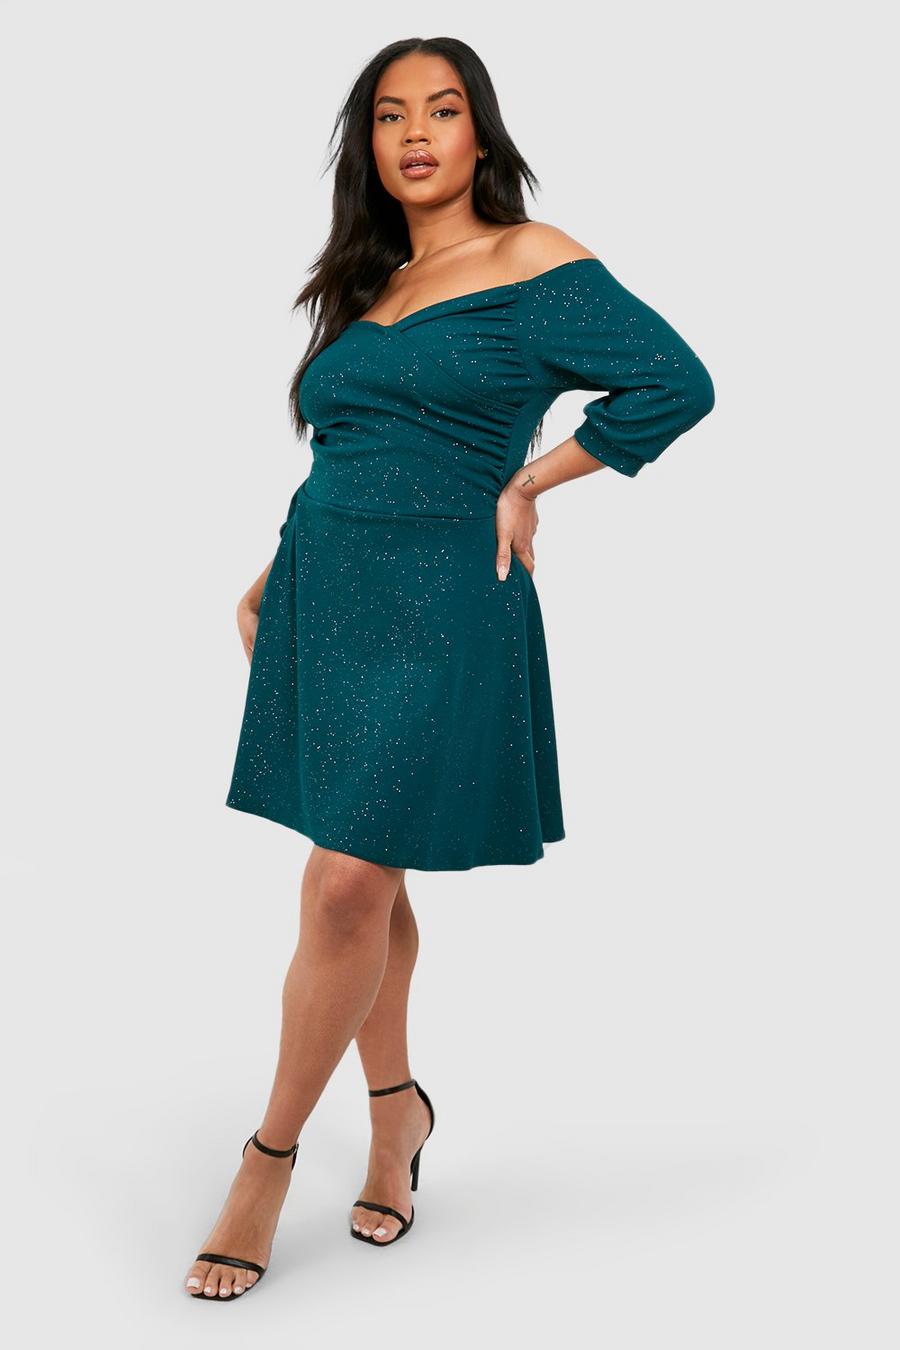 Grande taille - Robe patineuse pailletée, Emerald